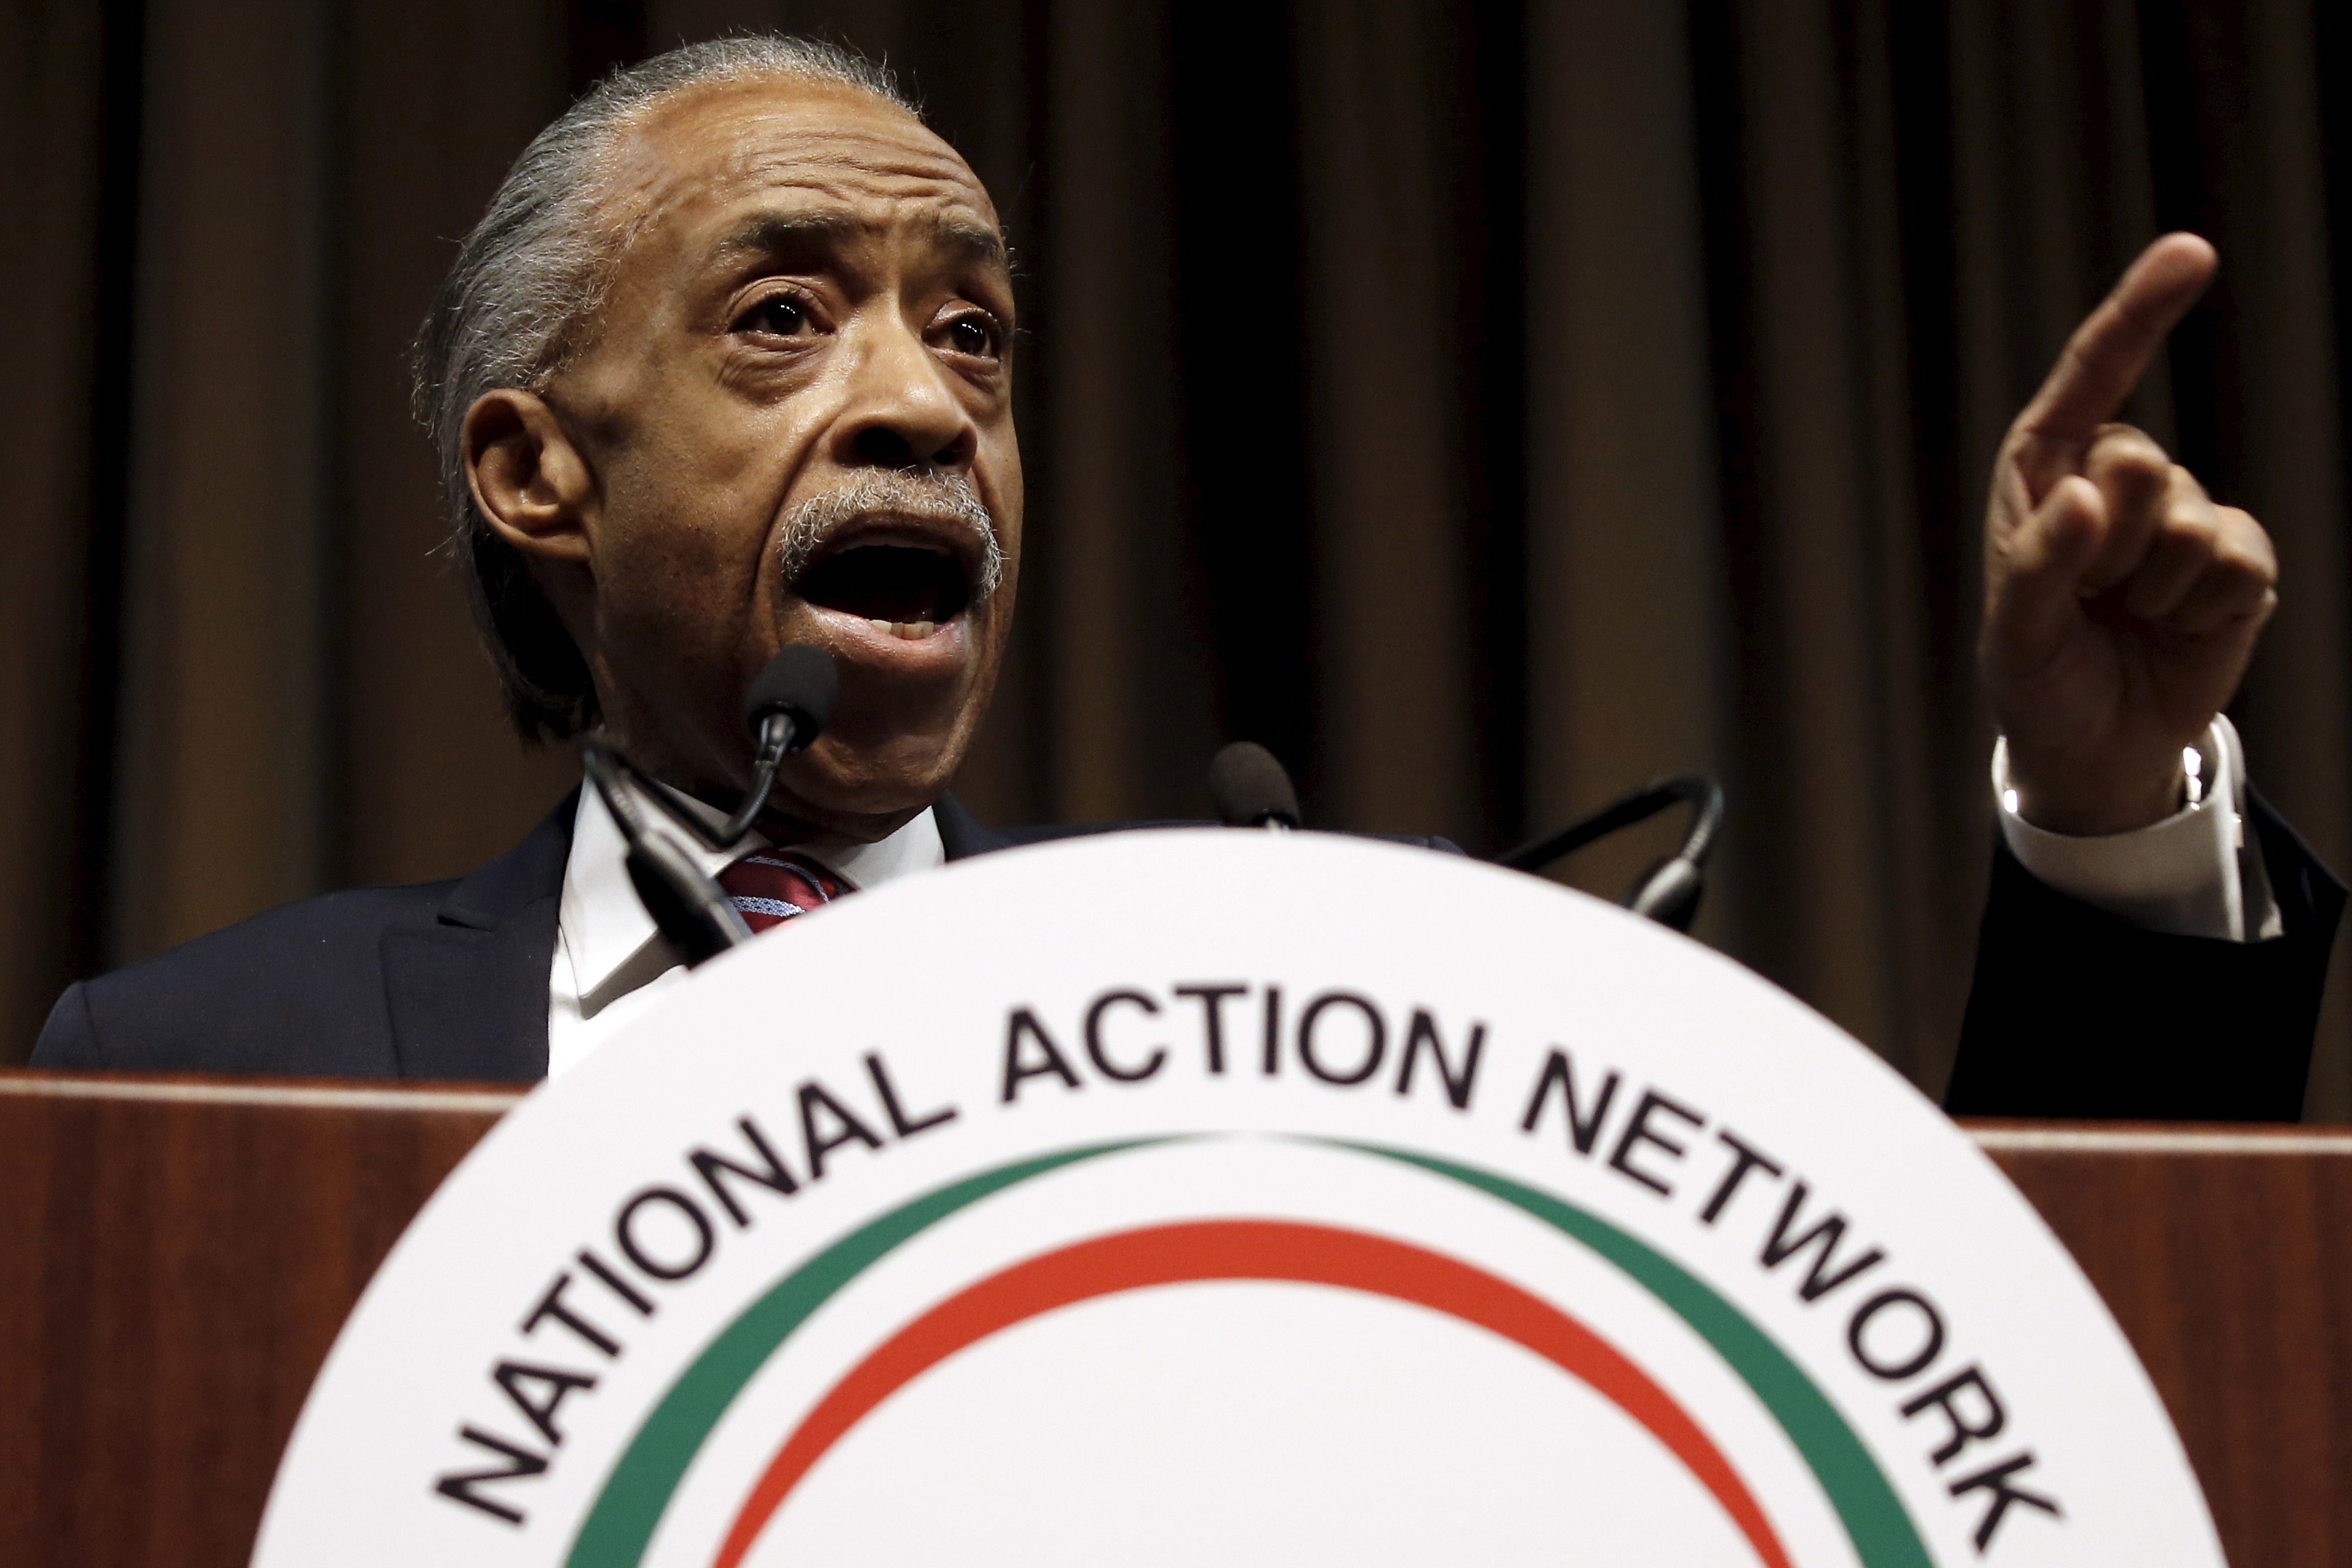 Sharpton leads 'Ministers March for Justice' in DC